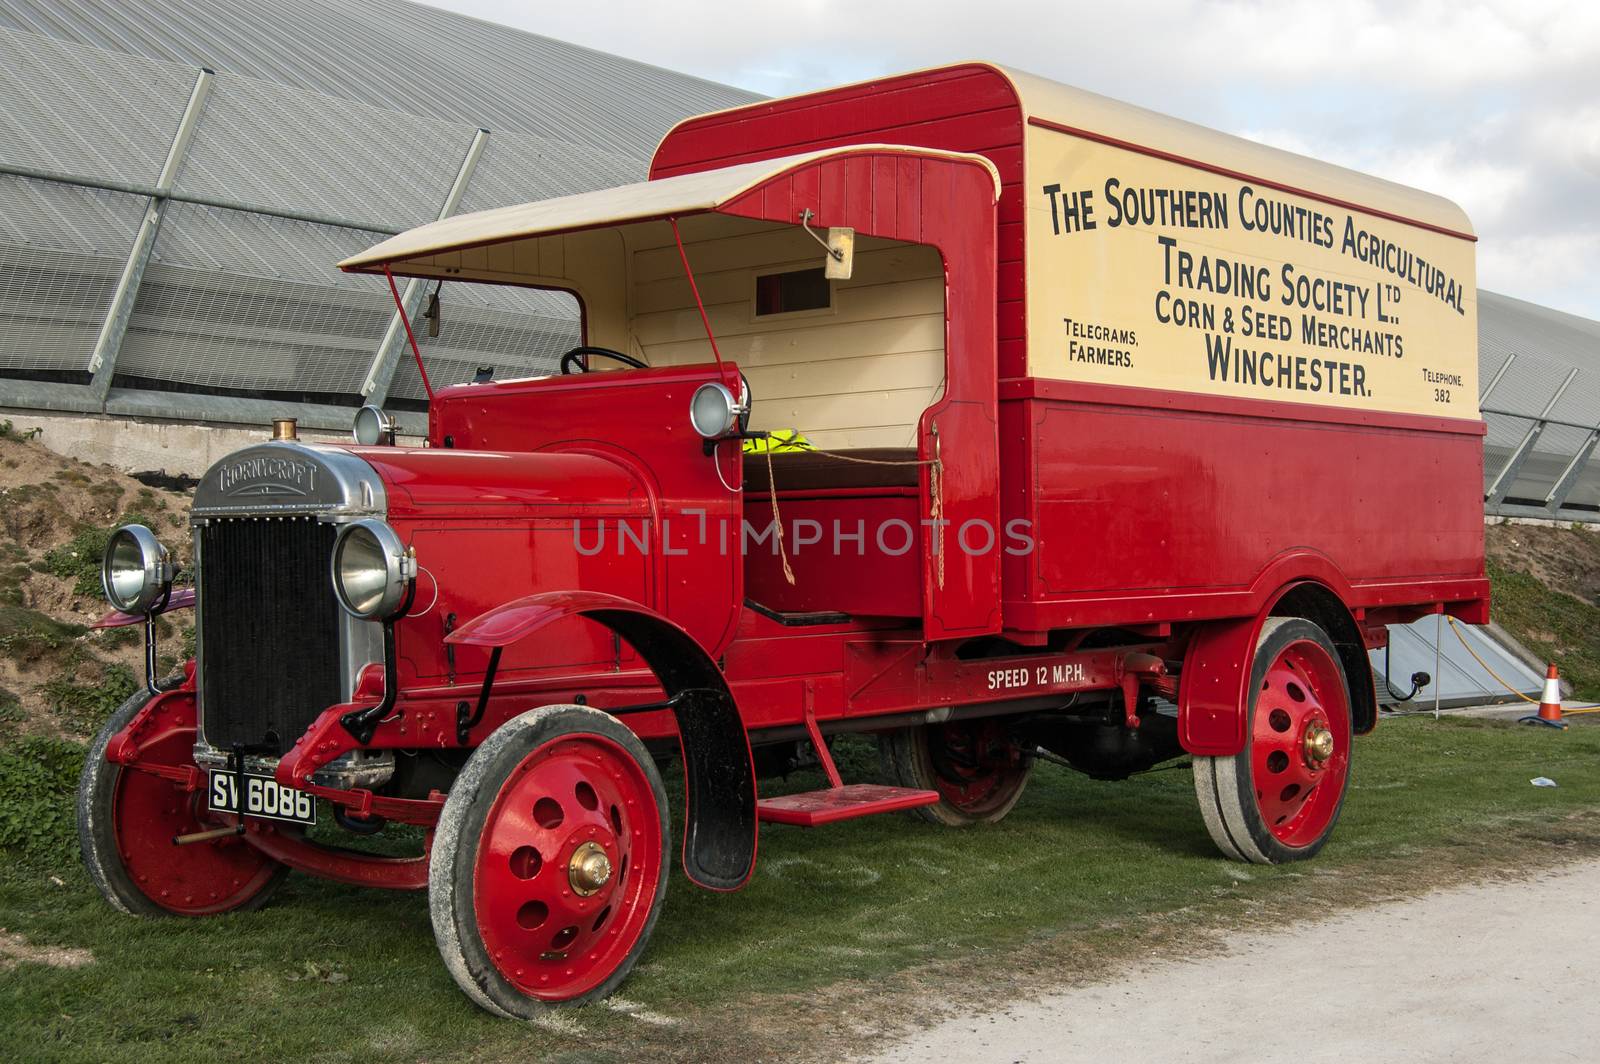 Basingstoke, UK - October 16, 2011: A vintage Thornycroft J Type Lorry dating from 1917 painted with the livery of the Southern Counties Agricultural Trading Societies or SCATS.  On public display at at transport fair in Basingstoke, Hampshire - the town where it was originally made.